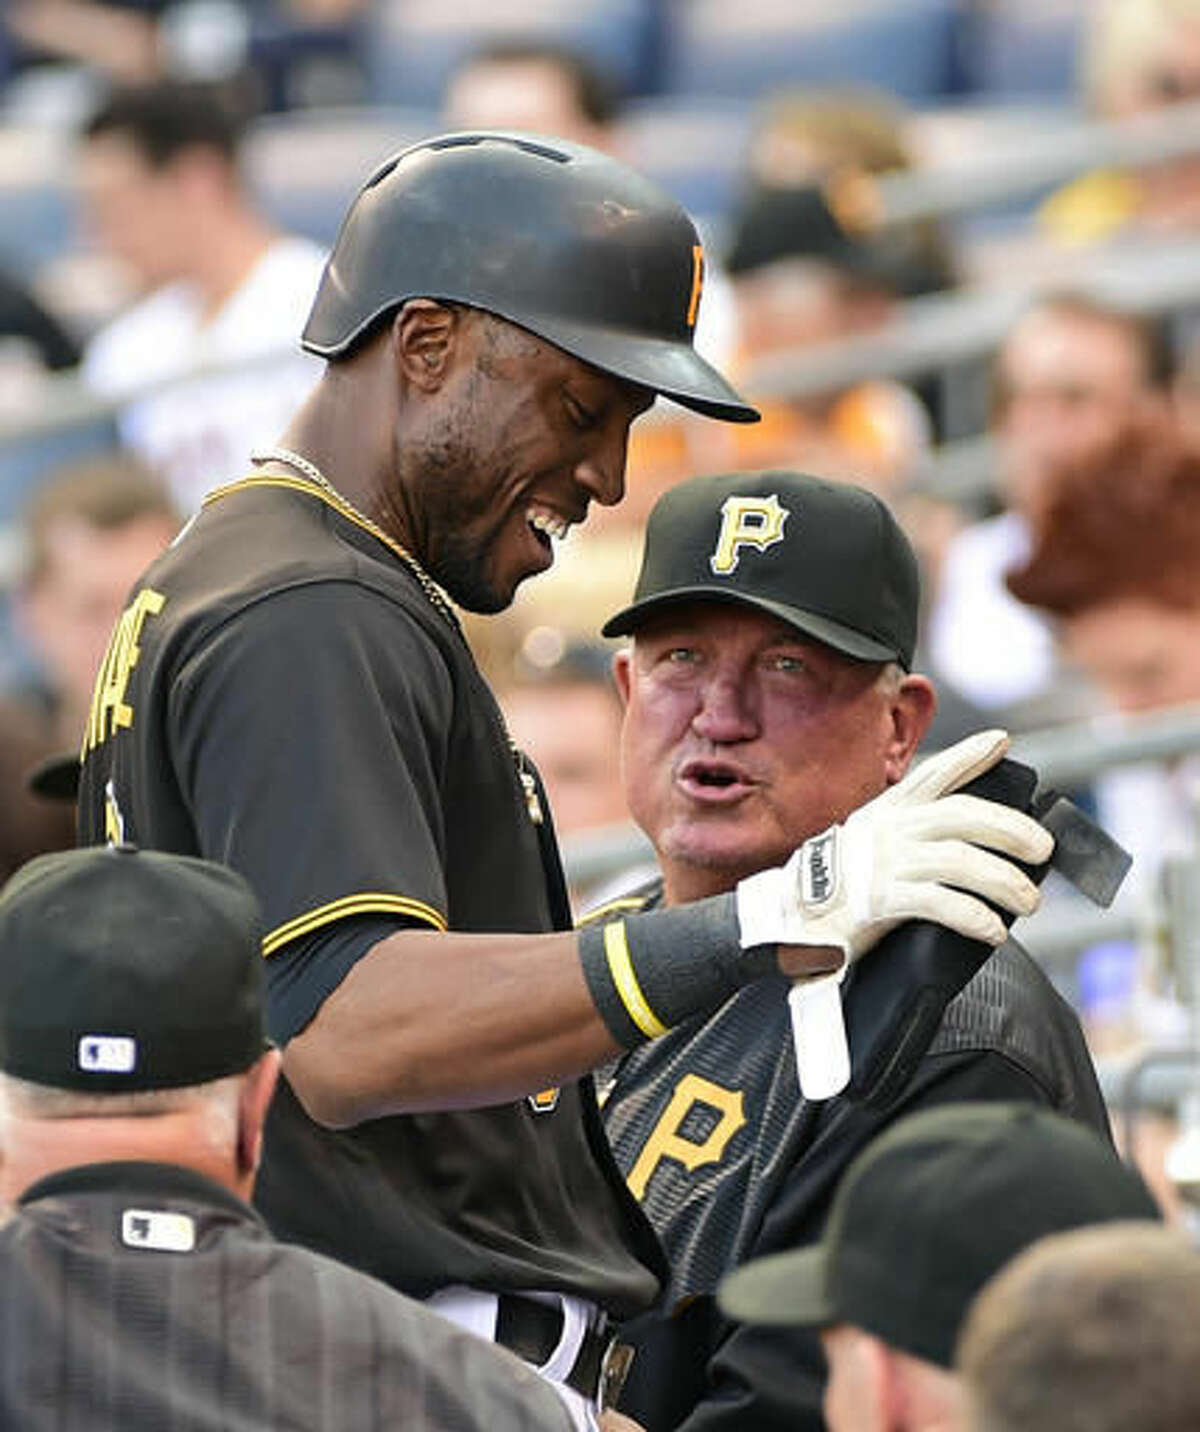 Pittsburgh Pirates Starling Marte (6), left, is congratulated by manager Clint Hurdle (13) after scoring in the first inning of a baseball game against the Cincinnati Reds in Pittsburgh, Saturday, Aug. 6, 2016. (AP Photo/Fred Vuich)